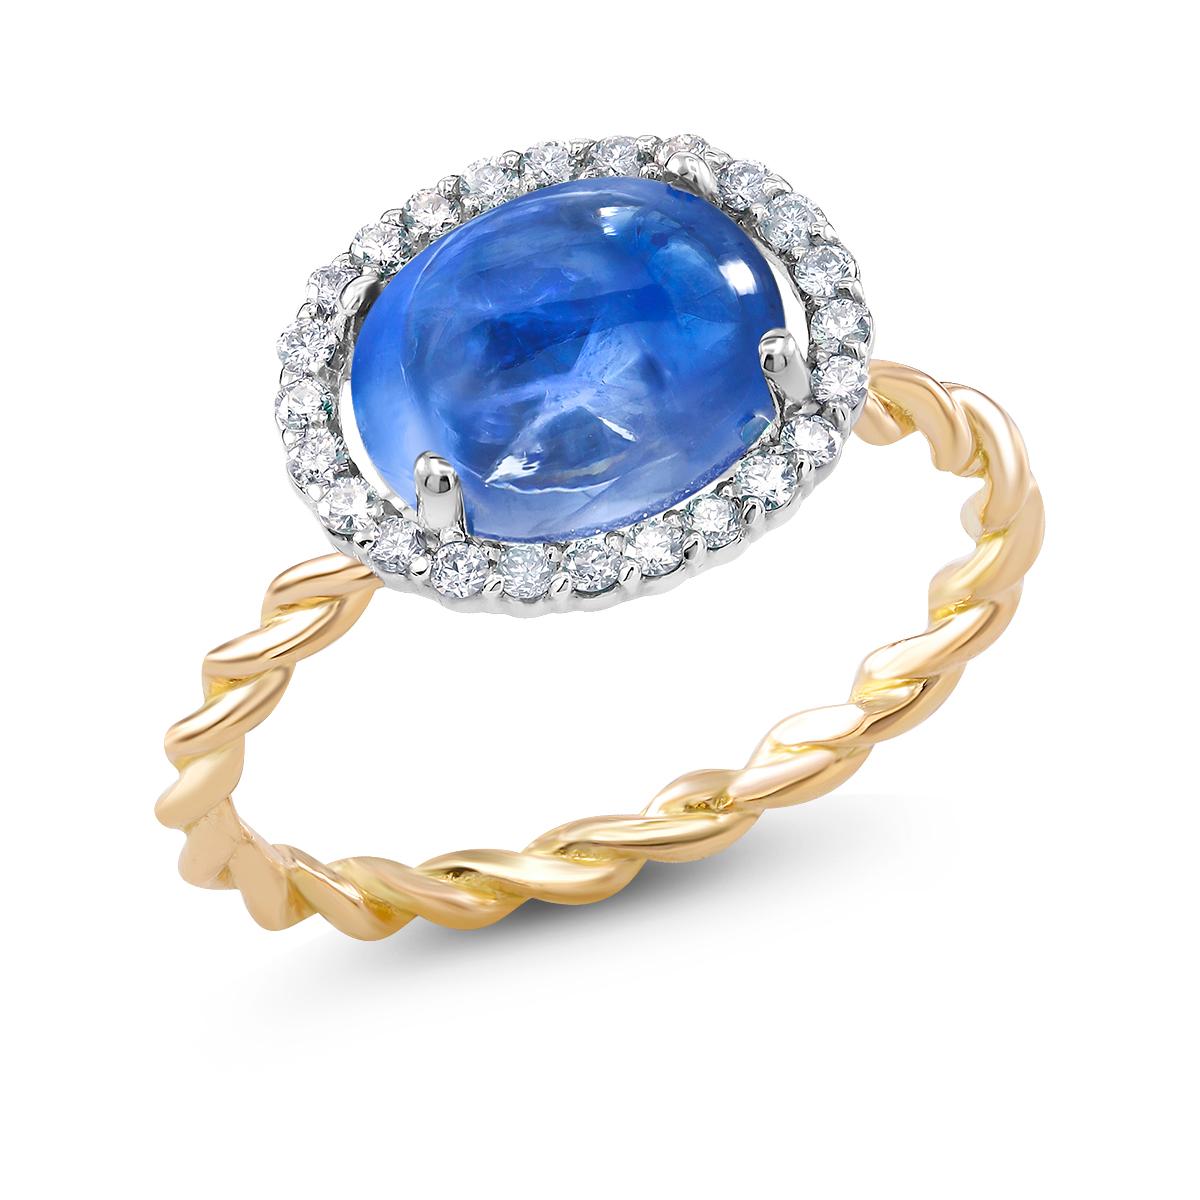 Fourteen karat rose and white gold braided ring
Ceylon cabochon sapphire weighing  3.32 carat                                                                       
Pave set diamond weighing 0.25 carat 
Ring size 6 In Stock
Ring can be resized 
New